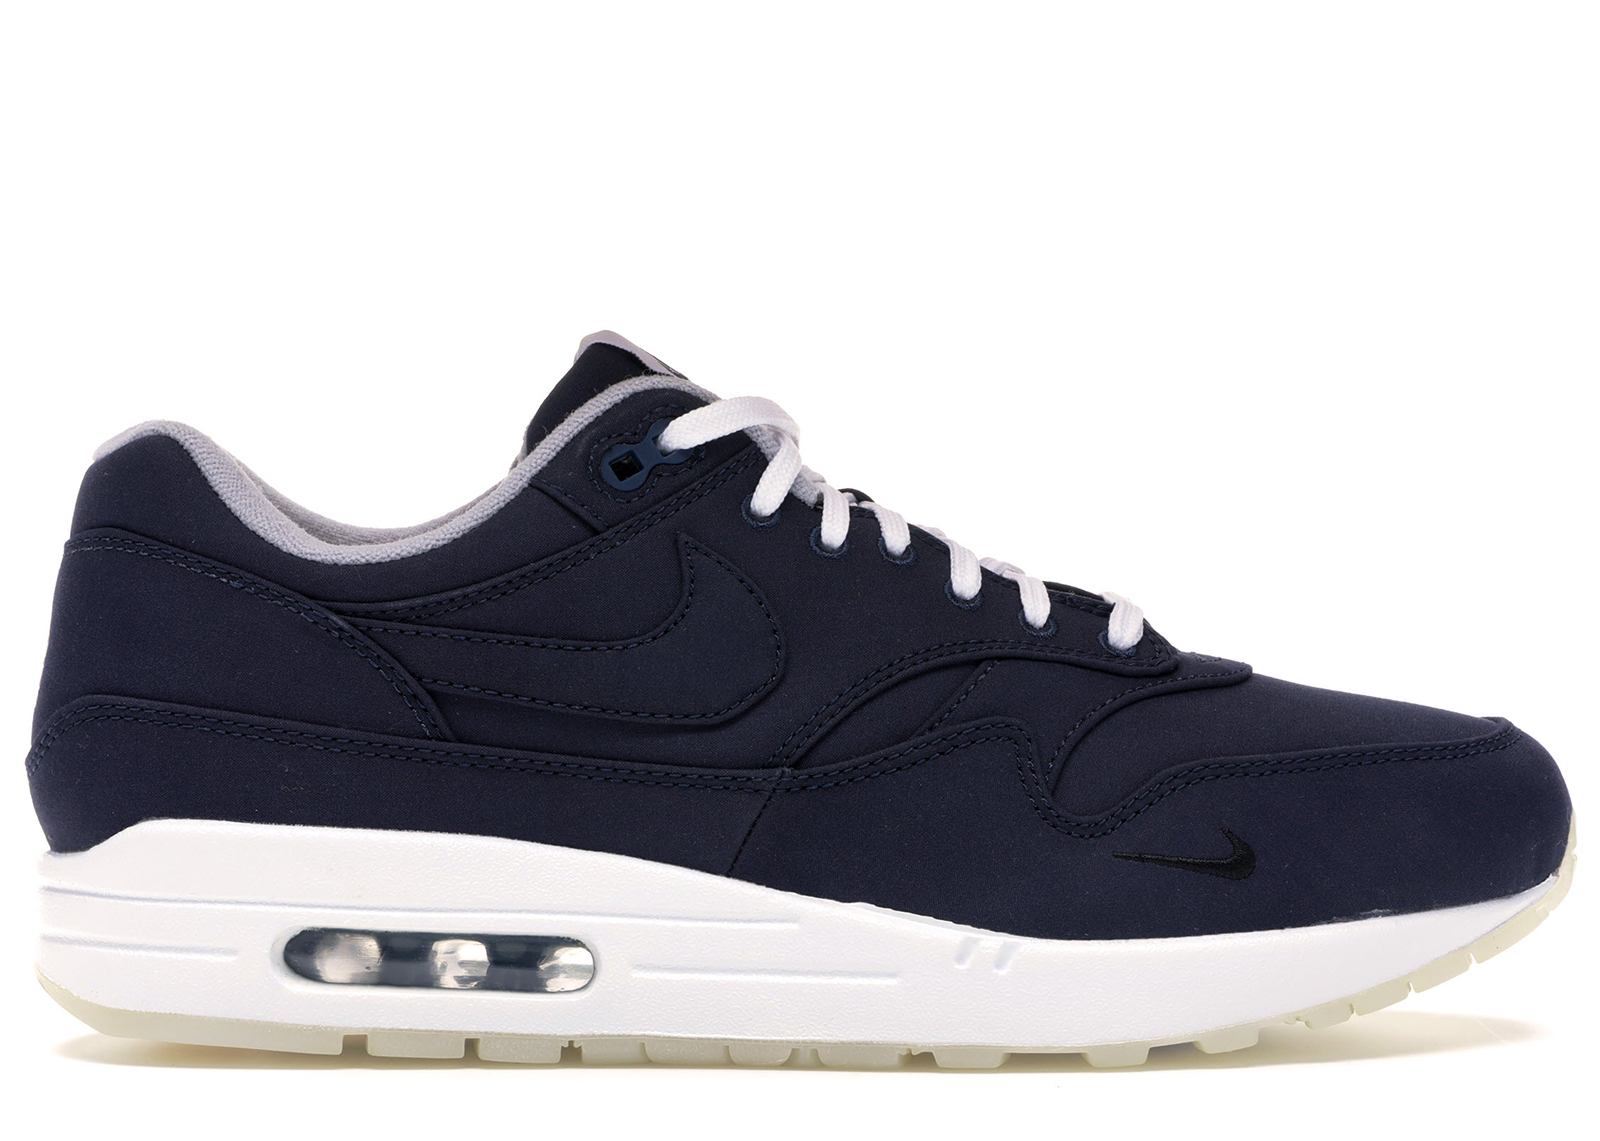 Nike Air Max 1 Dover Street Market Ventile Brave Blue メンズ